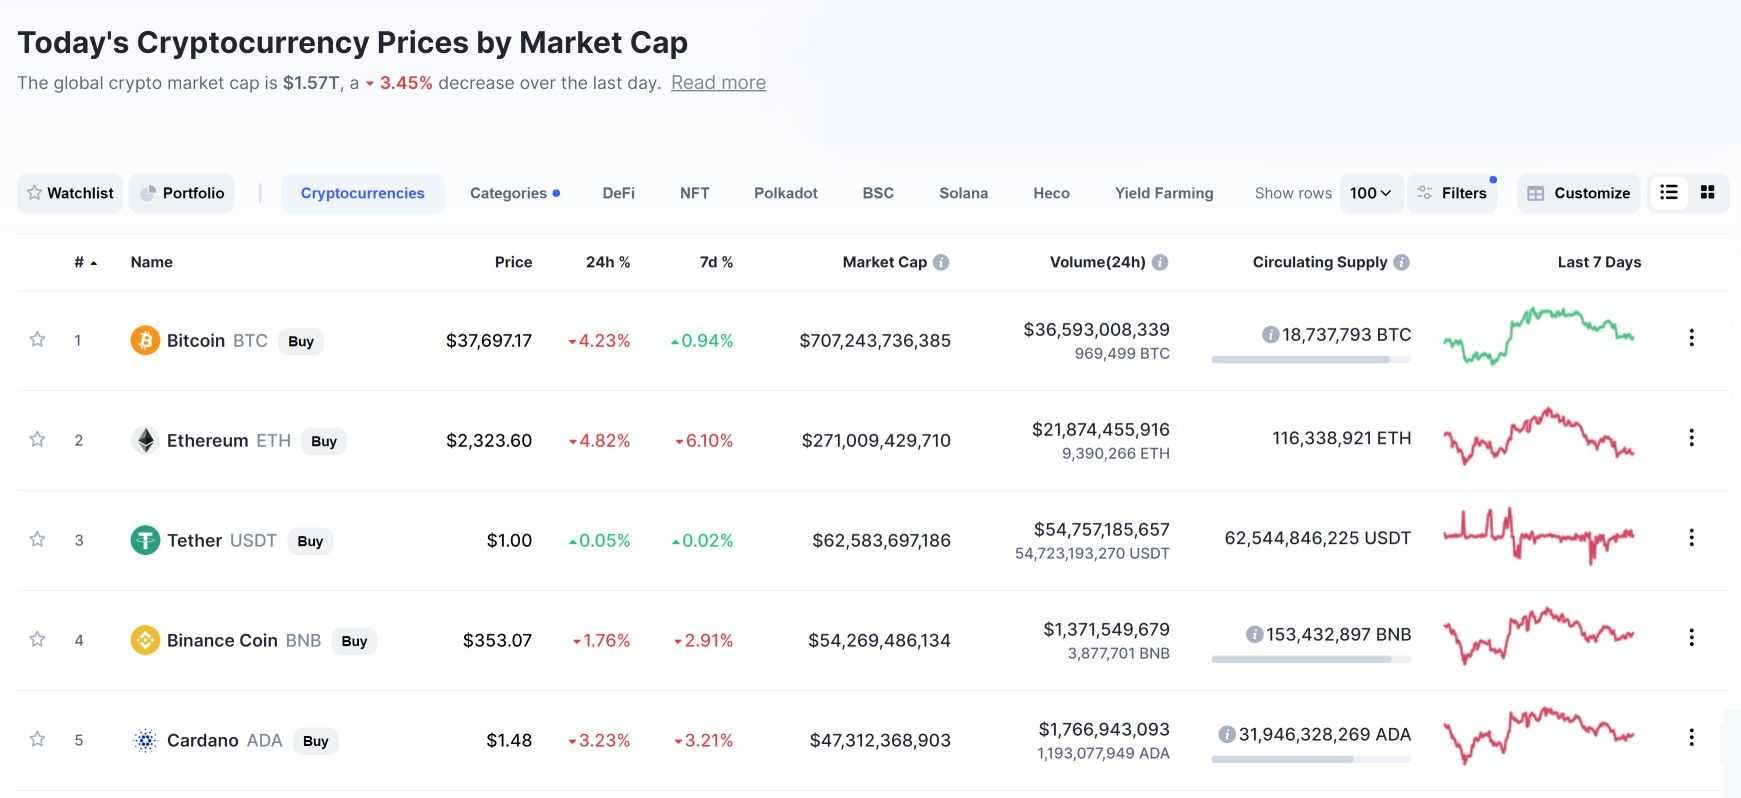 Cryptocurrency prices by market cap on www.coinmarketcap.com